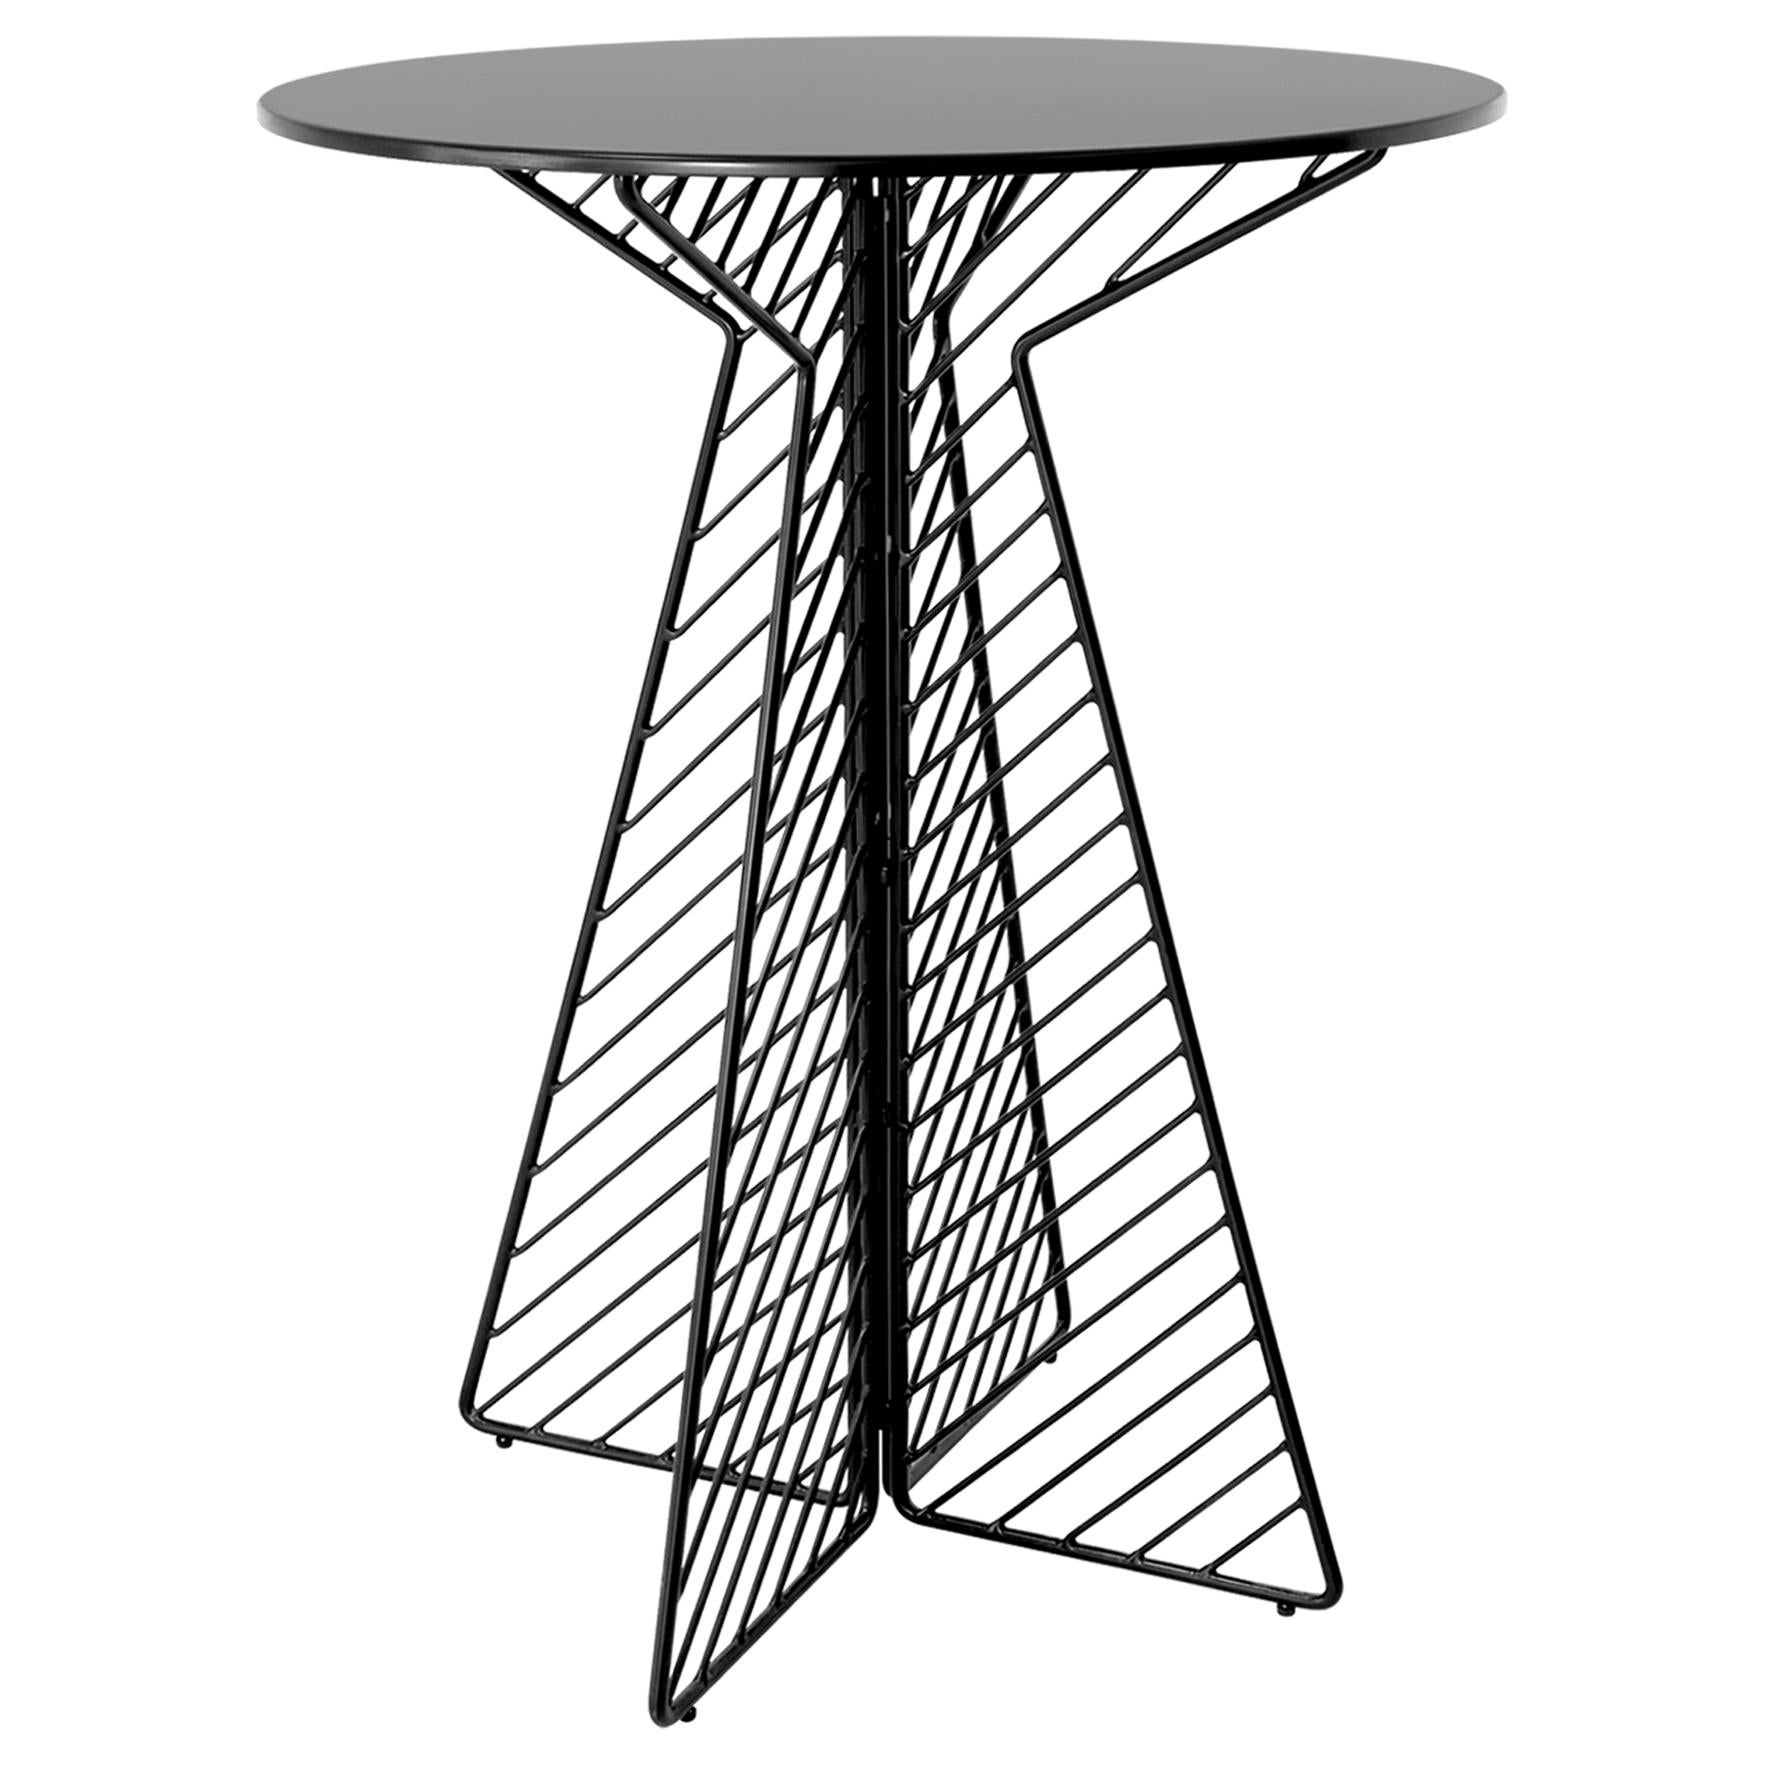 Minimalist Bar Table, Flat Pack Wire Cafe Bar Table in Black by Bend Goods